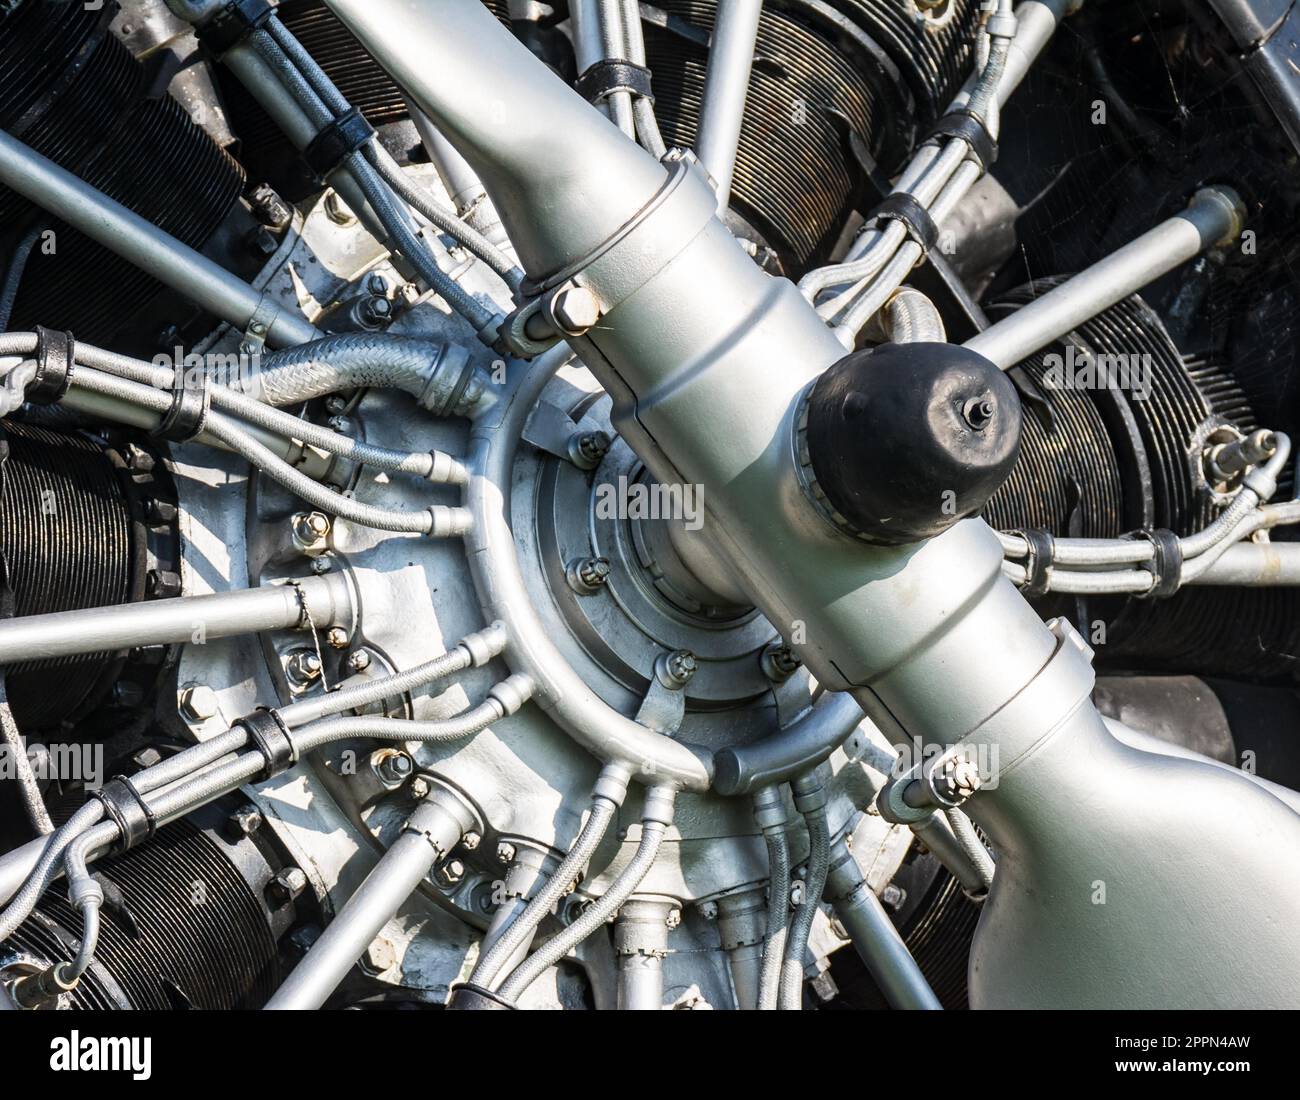 Propeller engine of an old historic aircraft Stock Photo